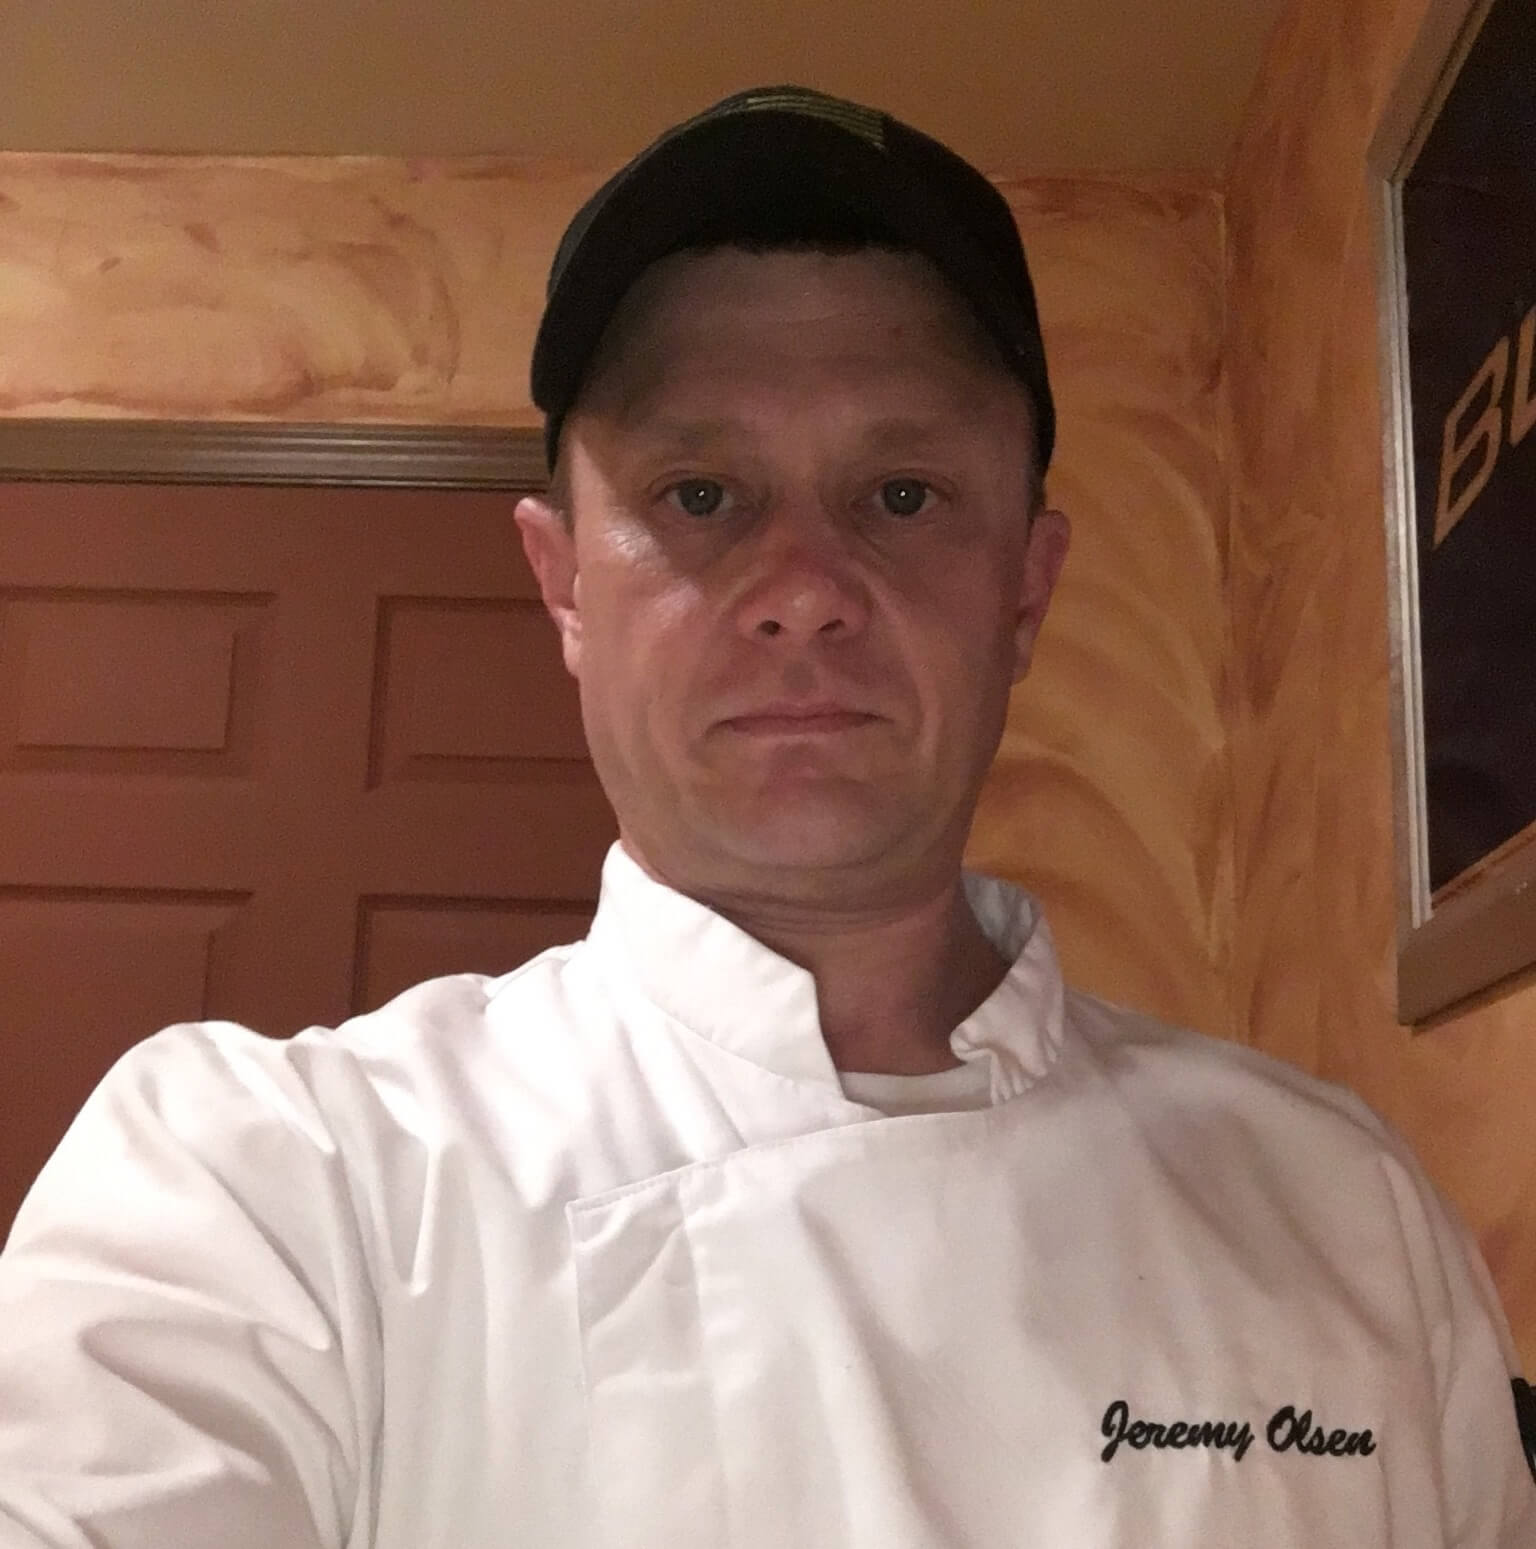 Culinary graduate Jeremy Olsen recently began an executive chef position.